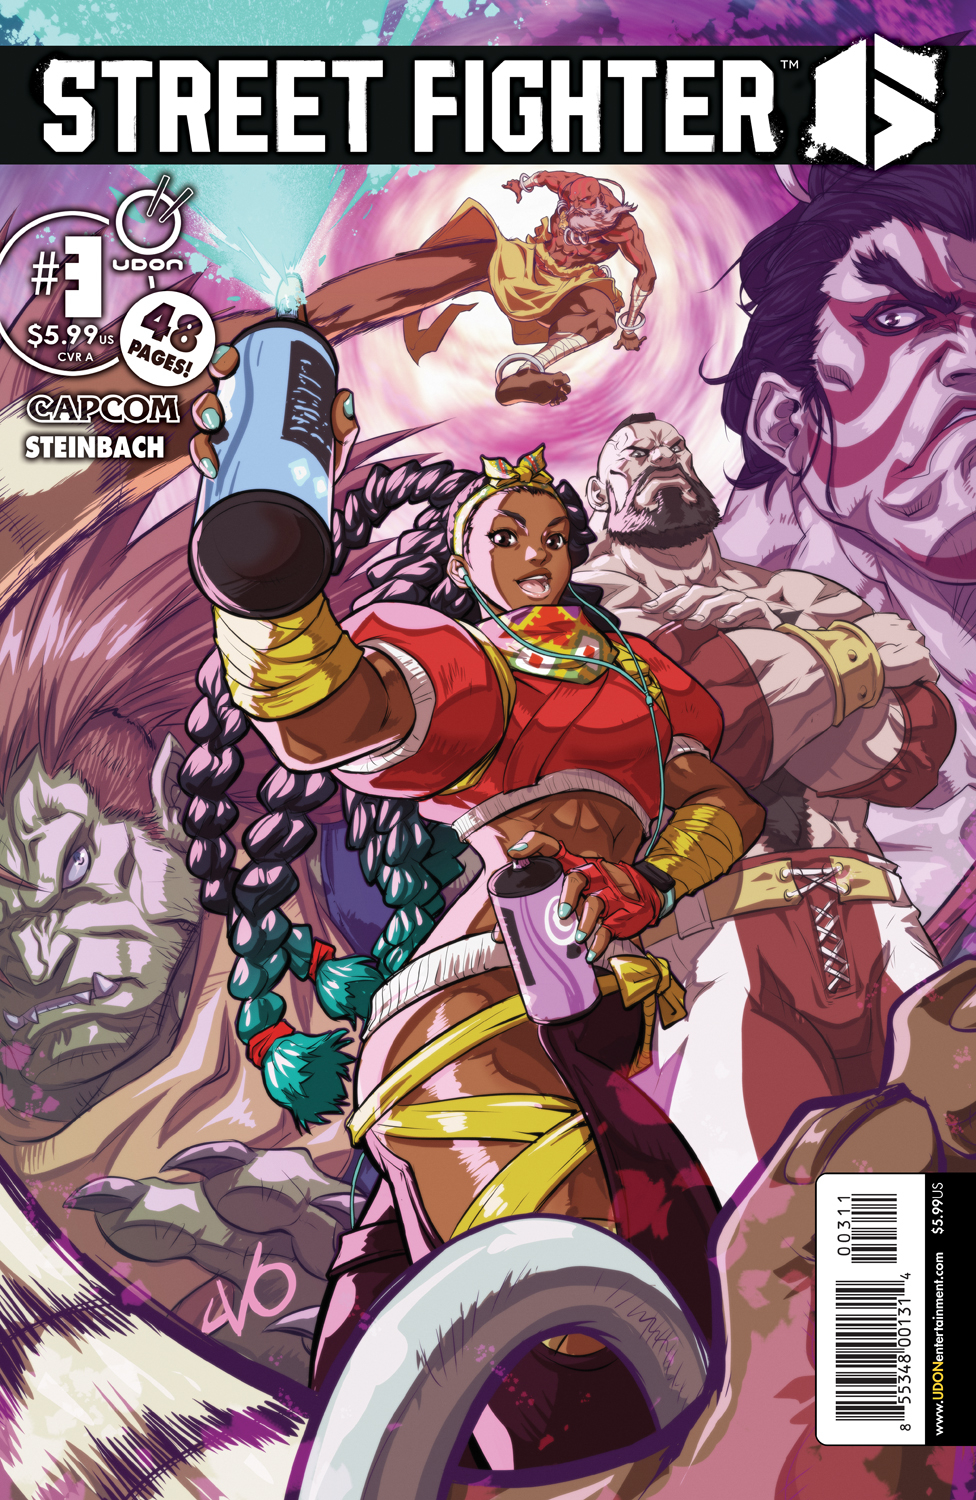 Street Fighter 6 #3 Cover A Vo (Of 4)